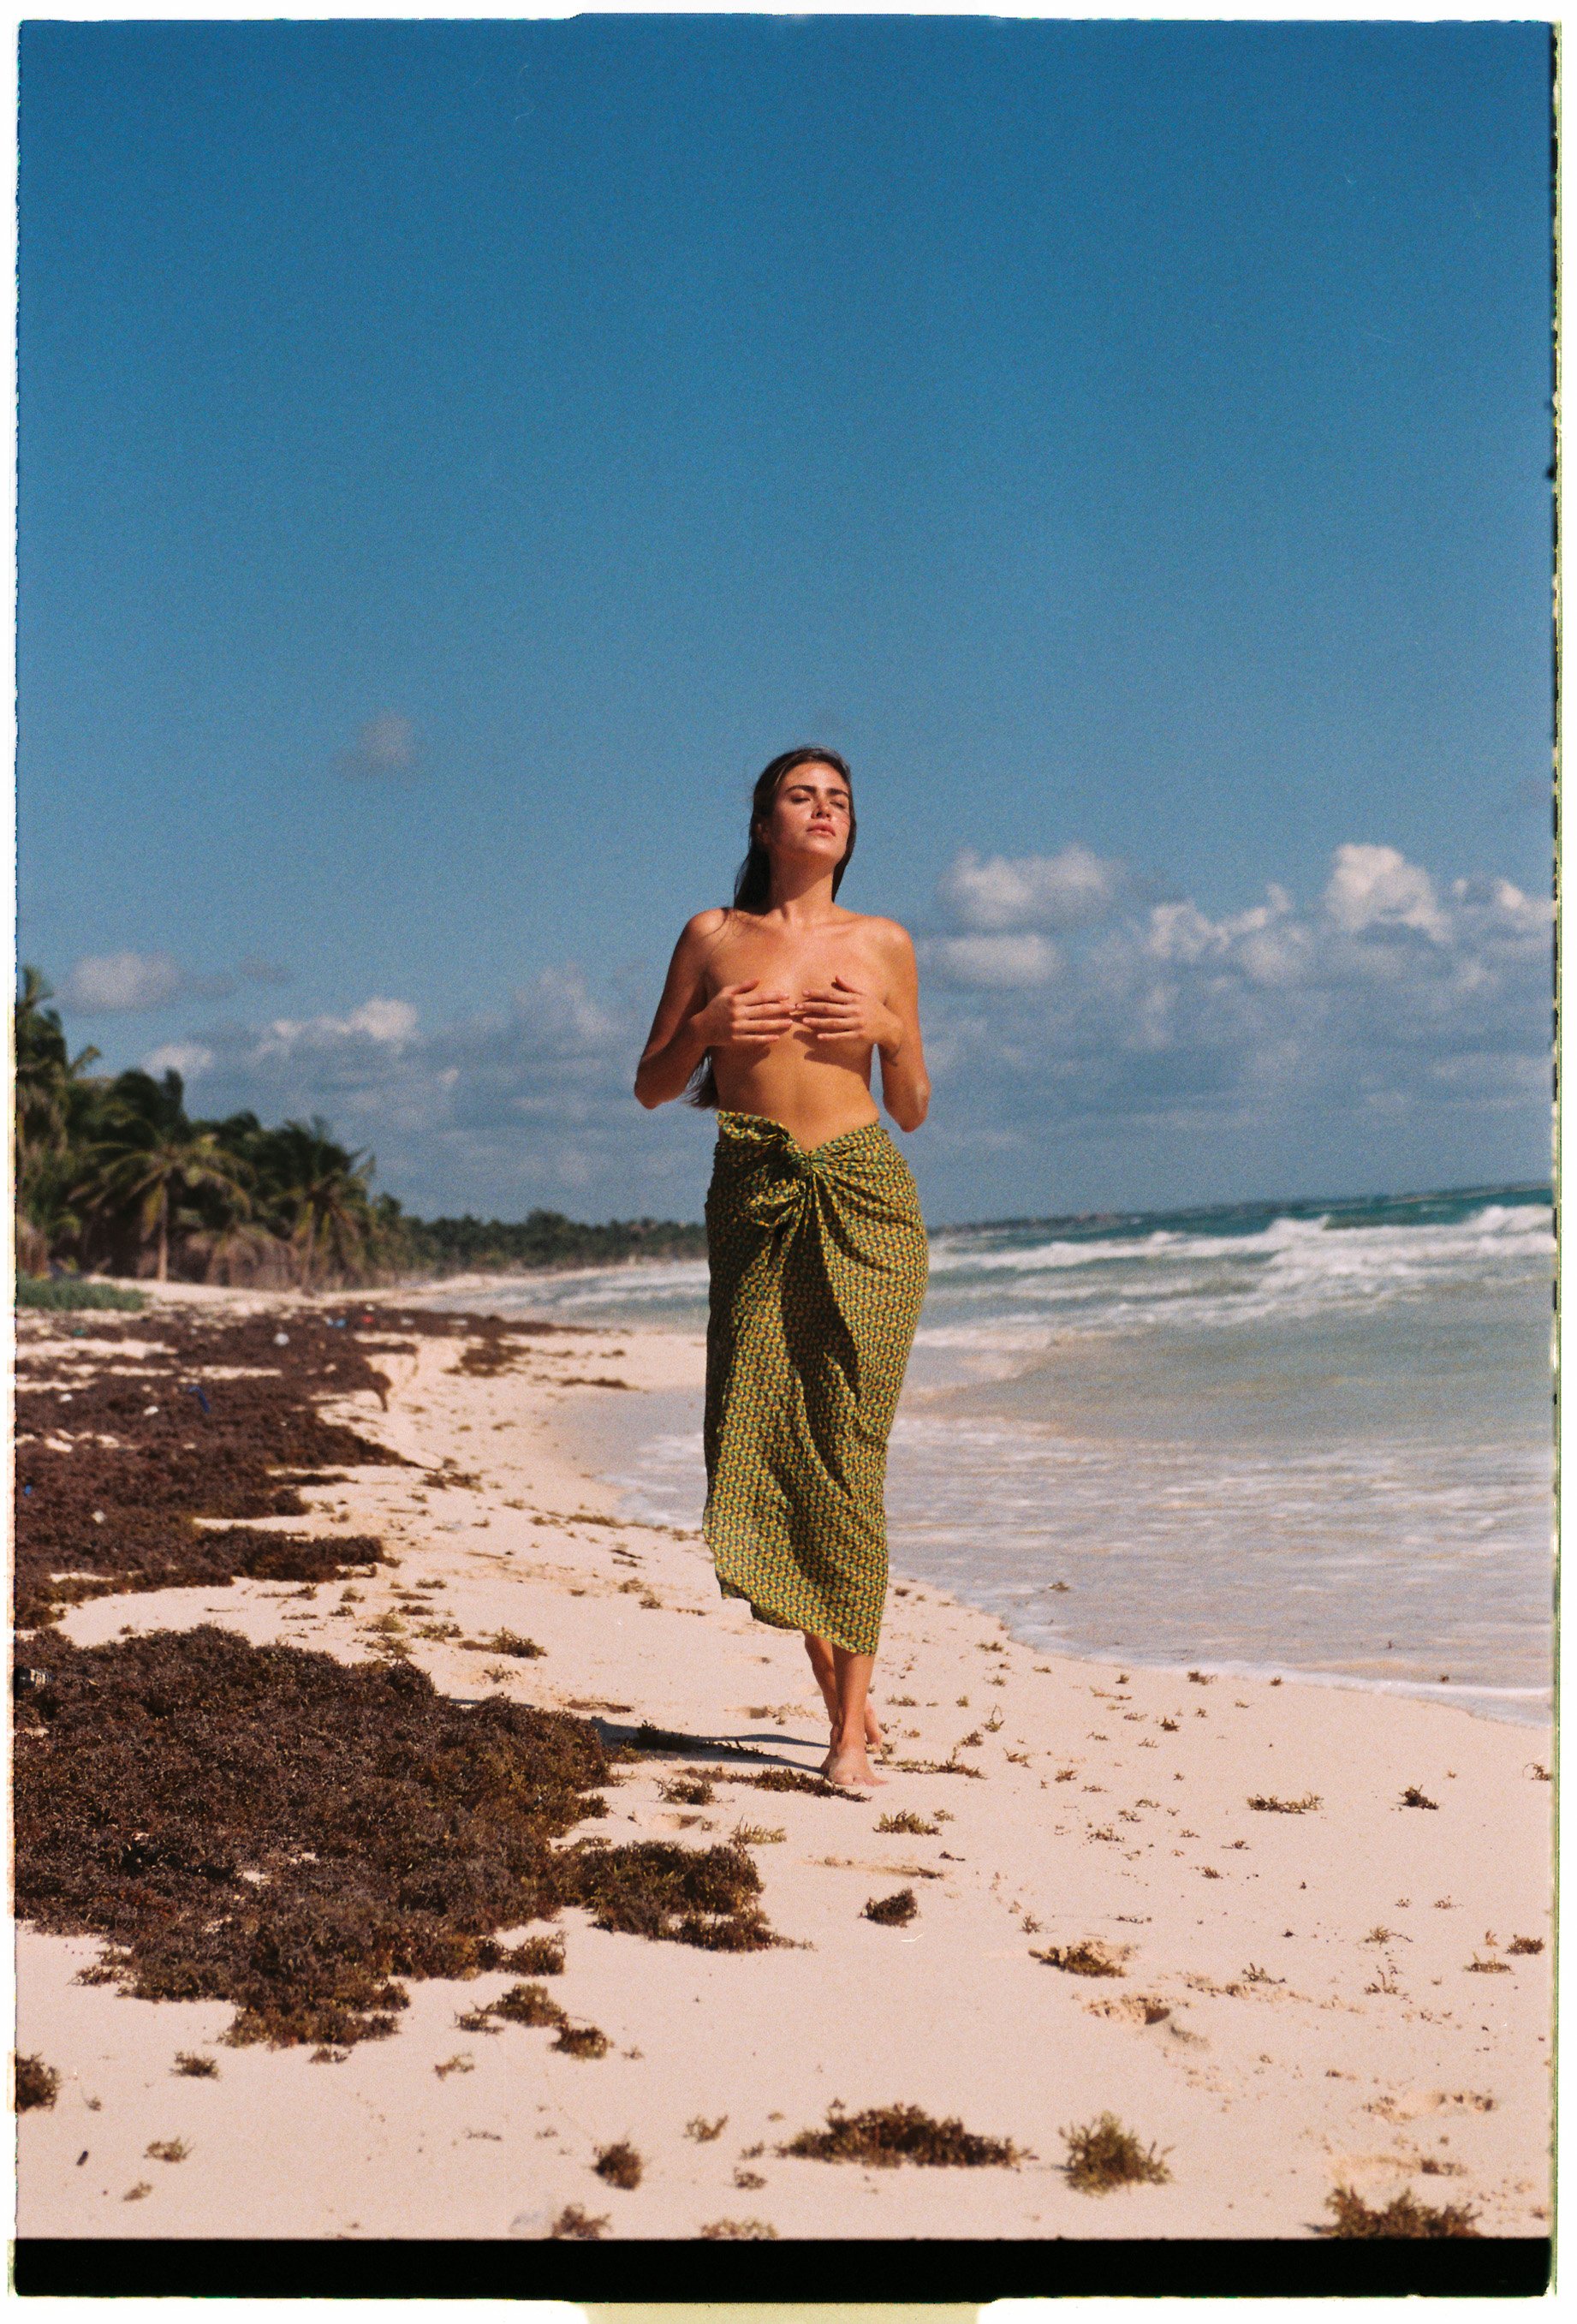  Film photoshoot for Faithfull The Brand captured on untouched beach in Sian Ka’an biosphere reserve in Tulum, Mexico with authentic Mexican cabana. Photographed by Susan Berry on Kodak e100 and Portra 160 35mm film with a Nikon F6 camera 